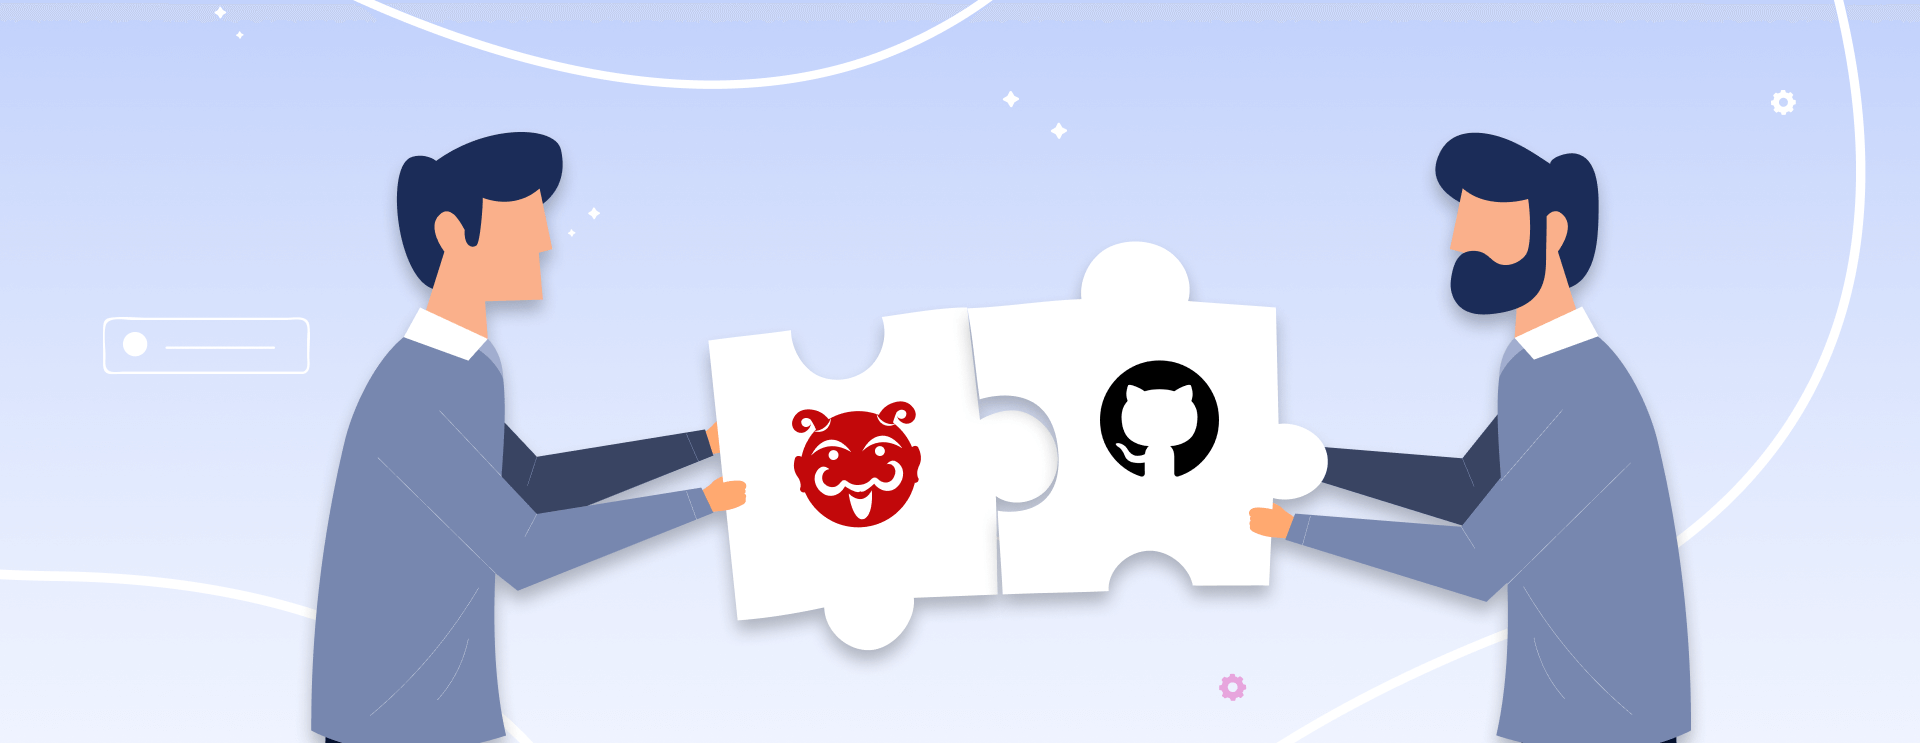 We’re also integrated with Github now!